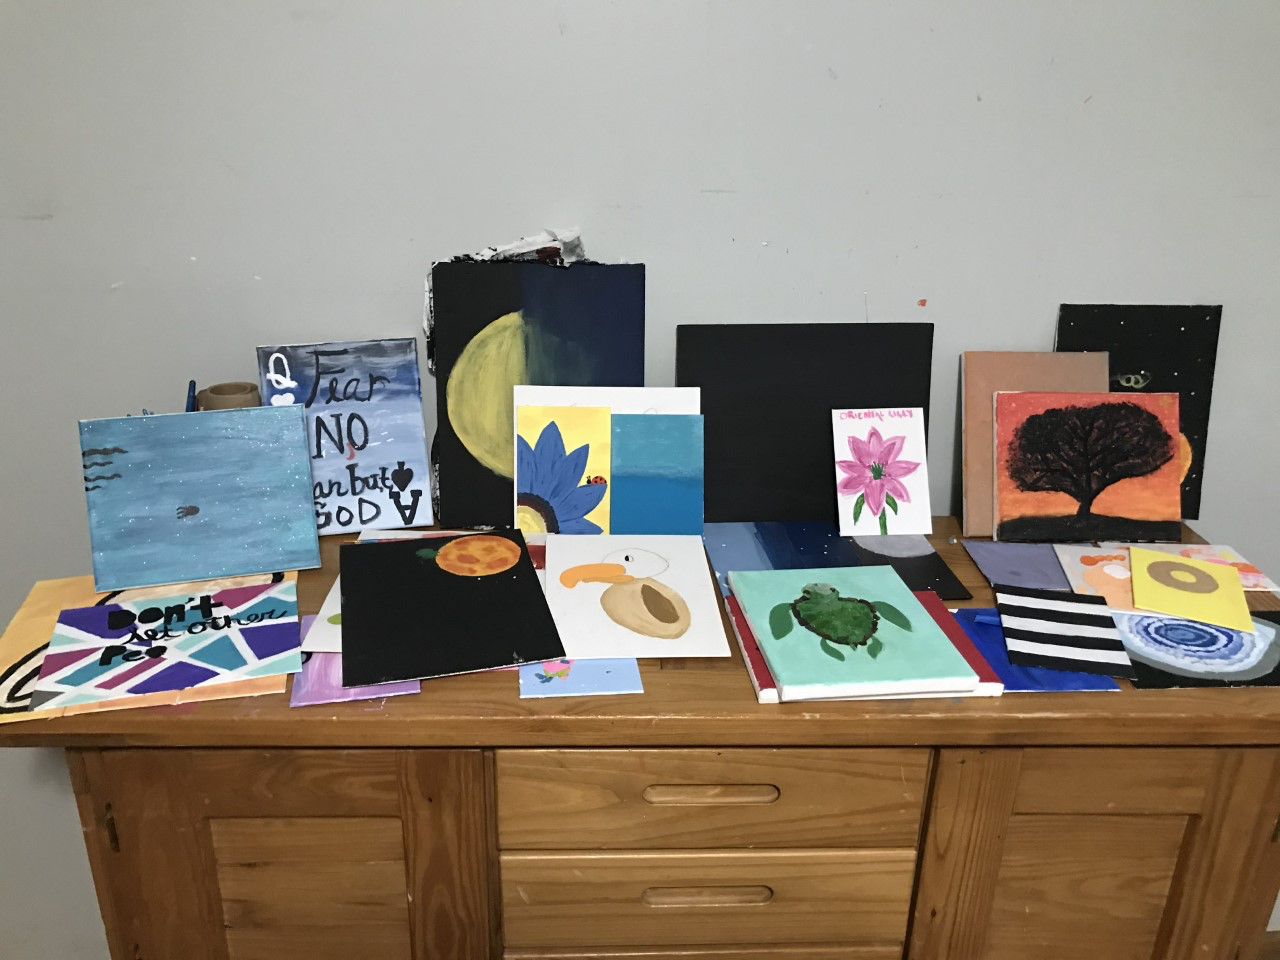 Different art projects created by the kids in the group home